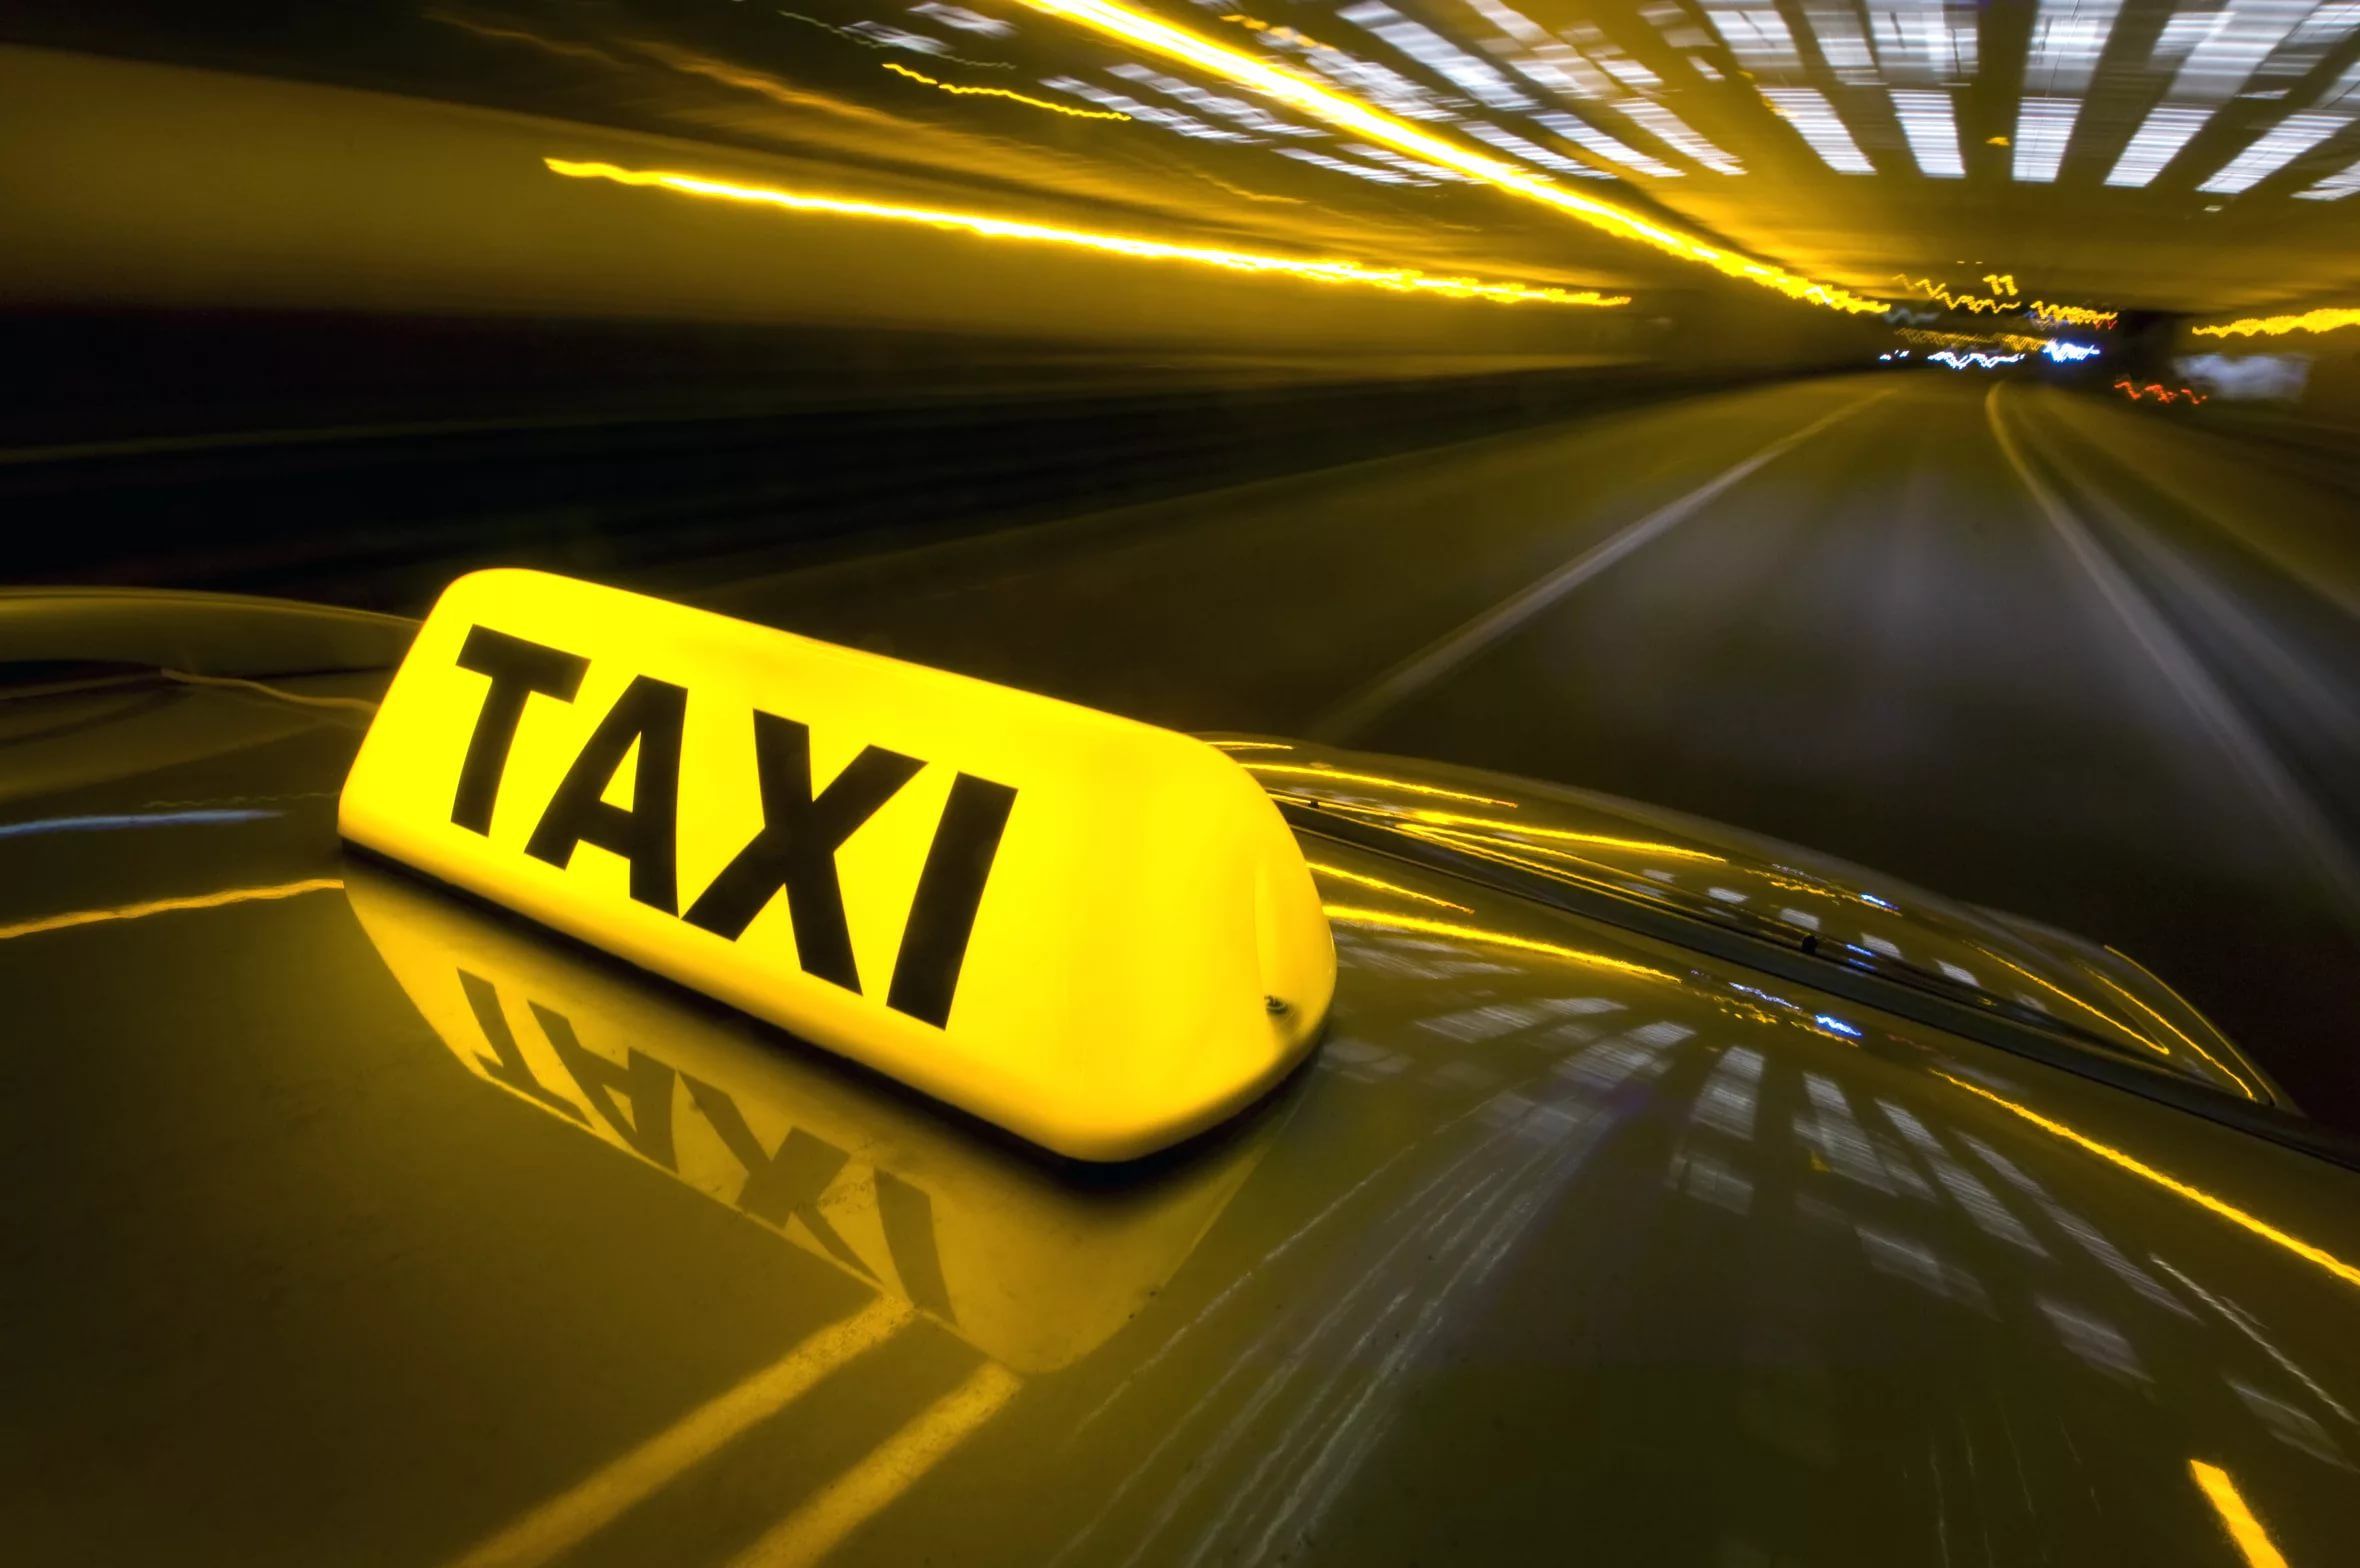 Taxi Wallpaper Free Taxi Background